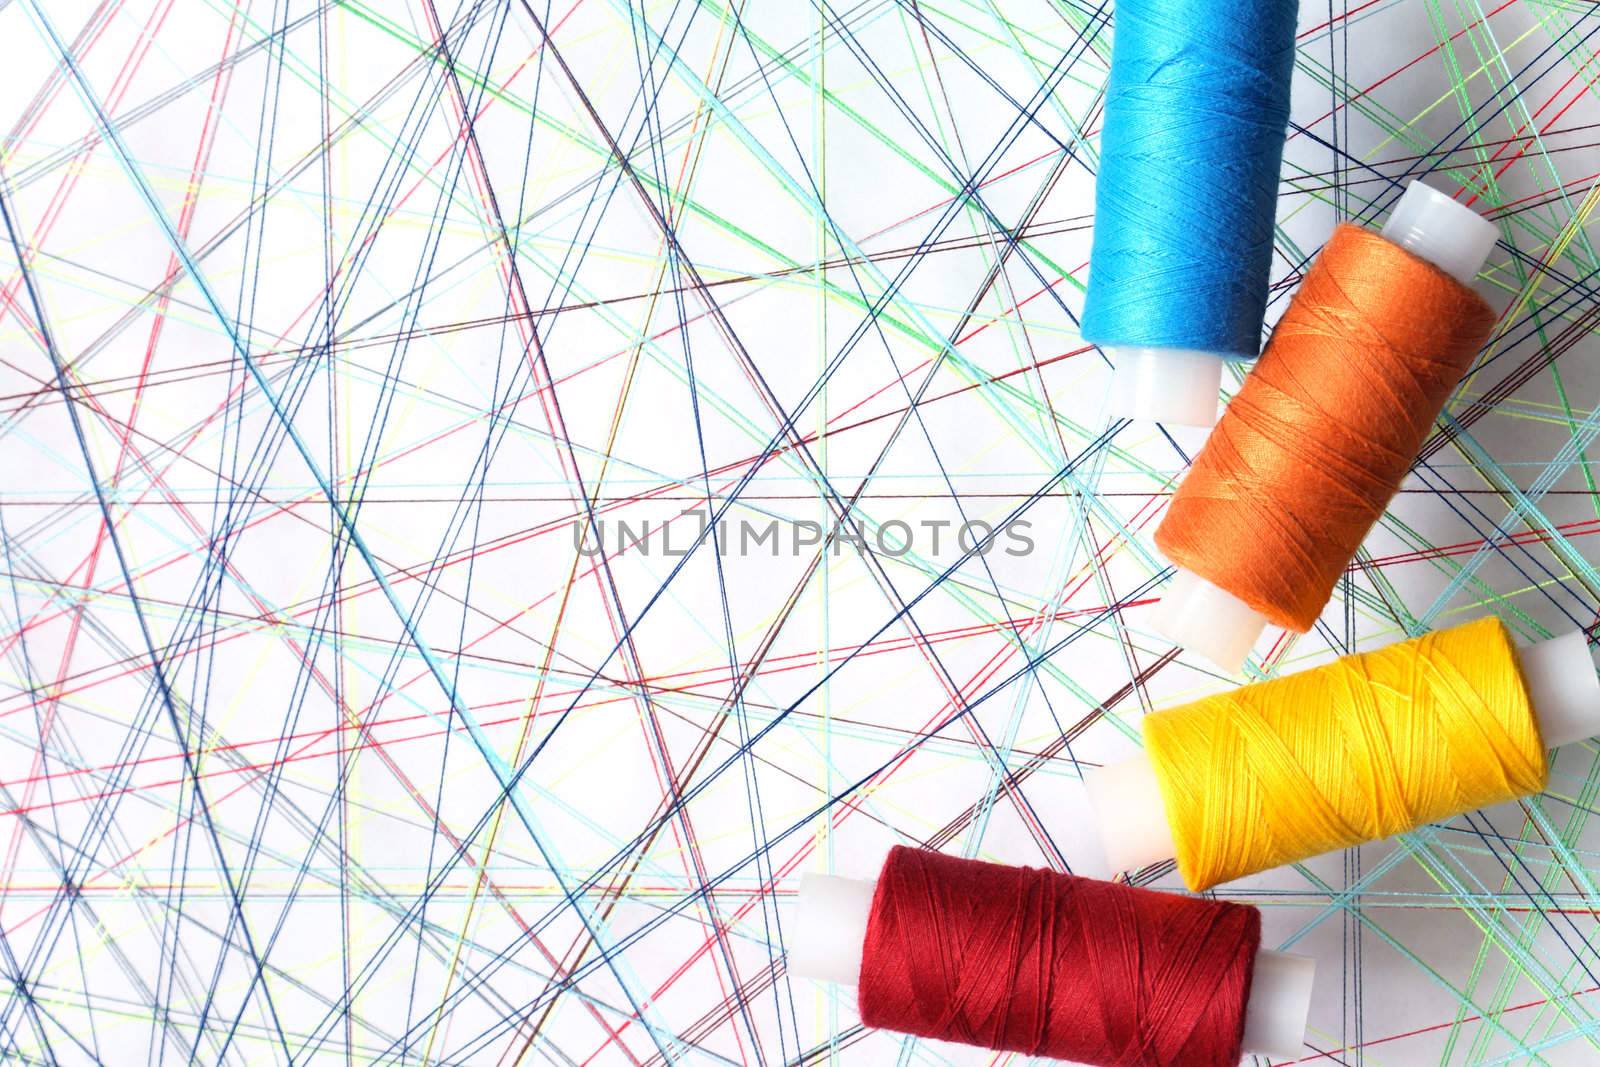 Four spools of thread on background with crossing threads